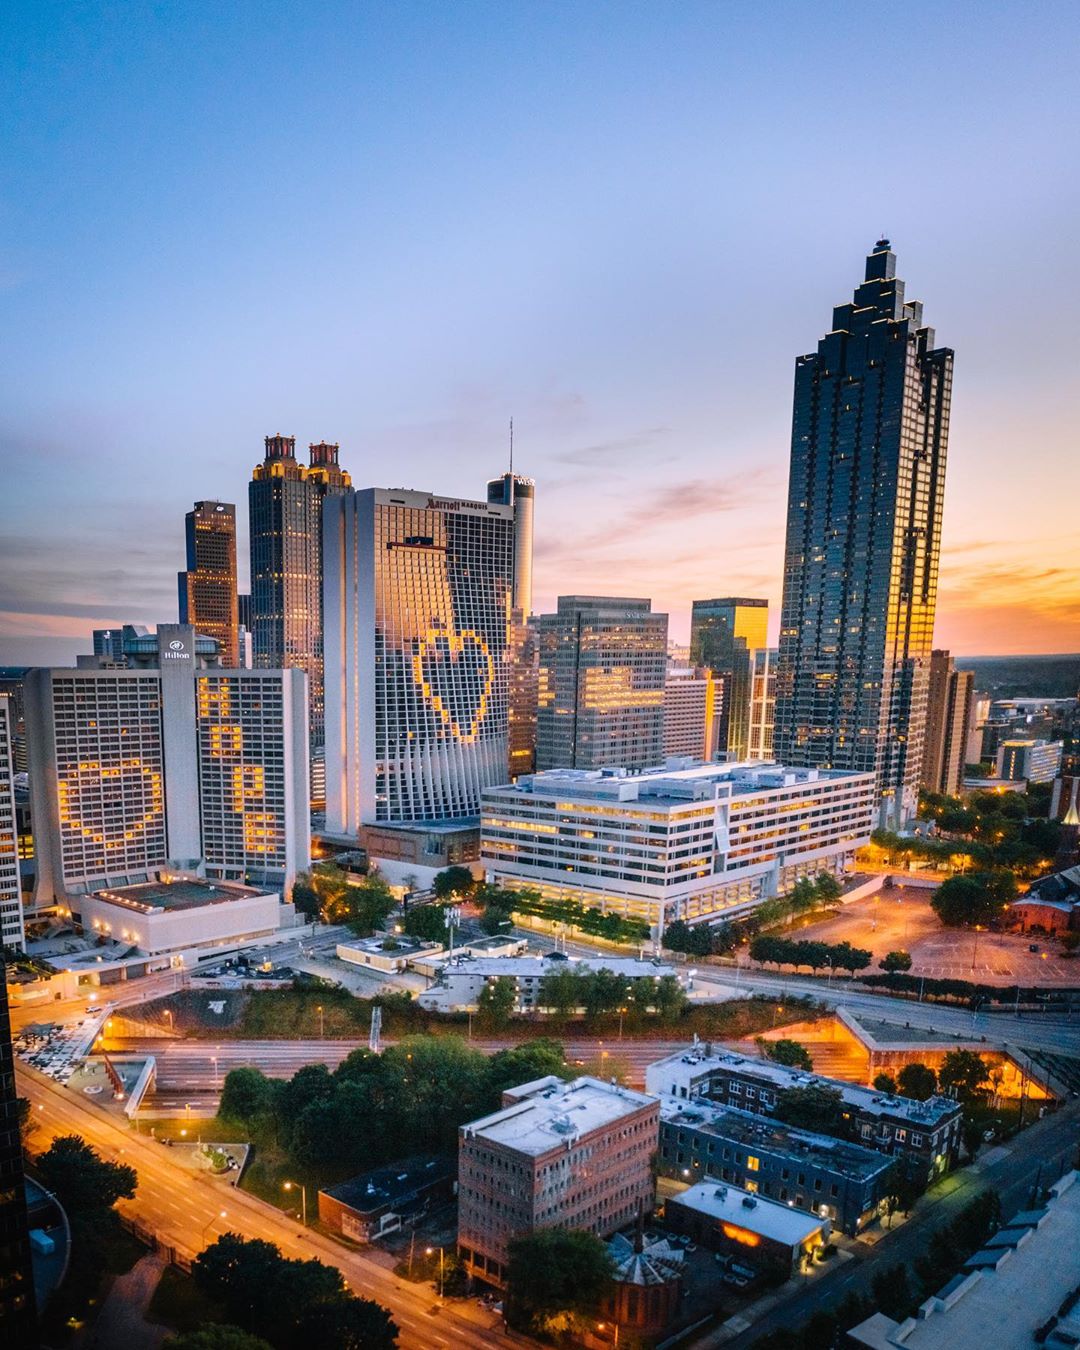 View of Downtown Atlanta at Dusk. Photo by Instagram user @jerrito1